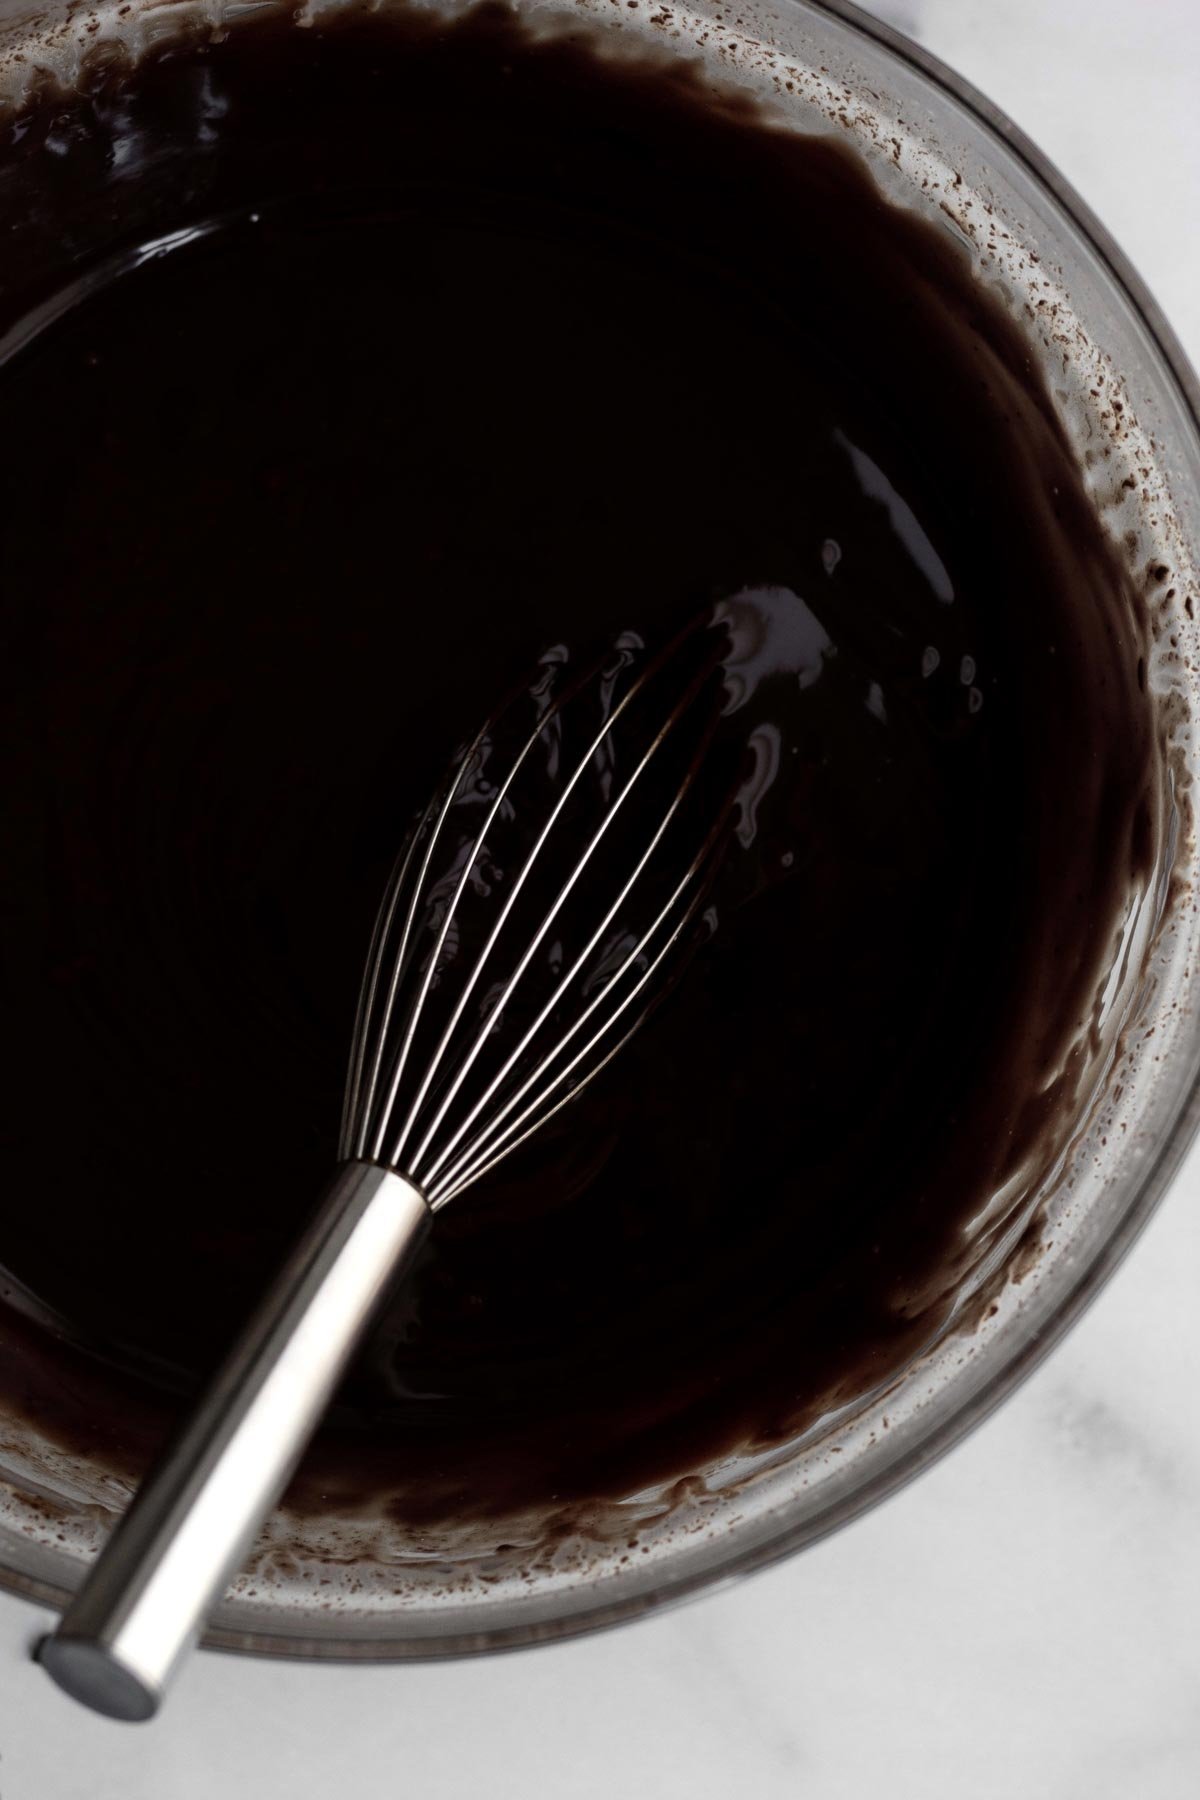 Whisking together the milk and chips to make a ganache.